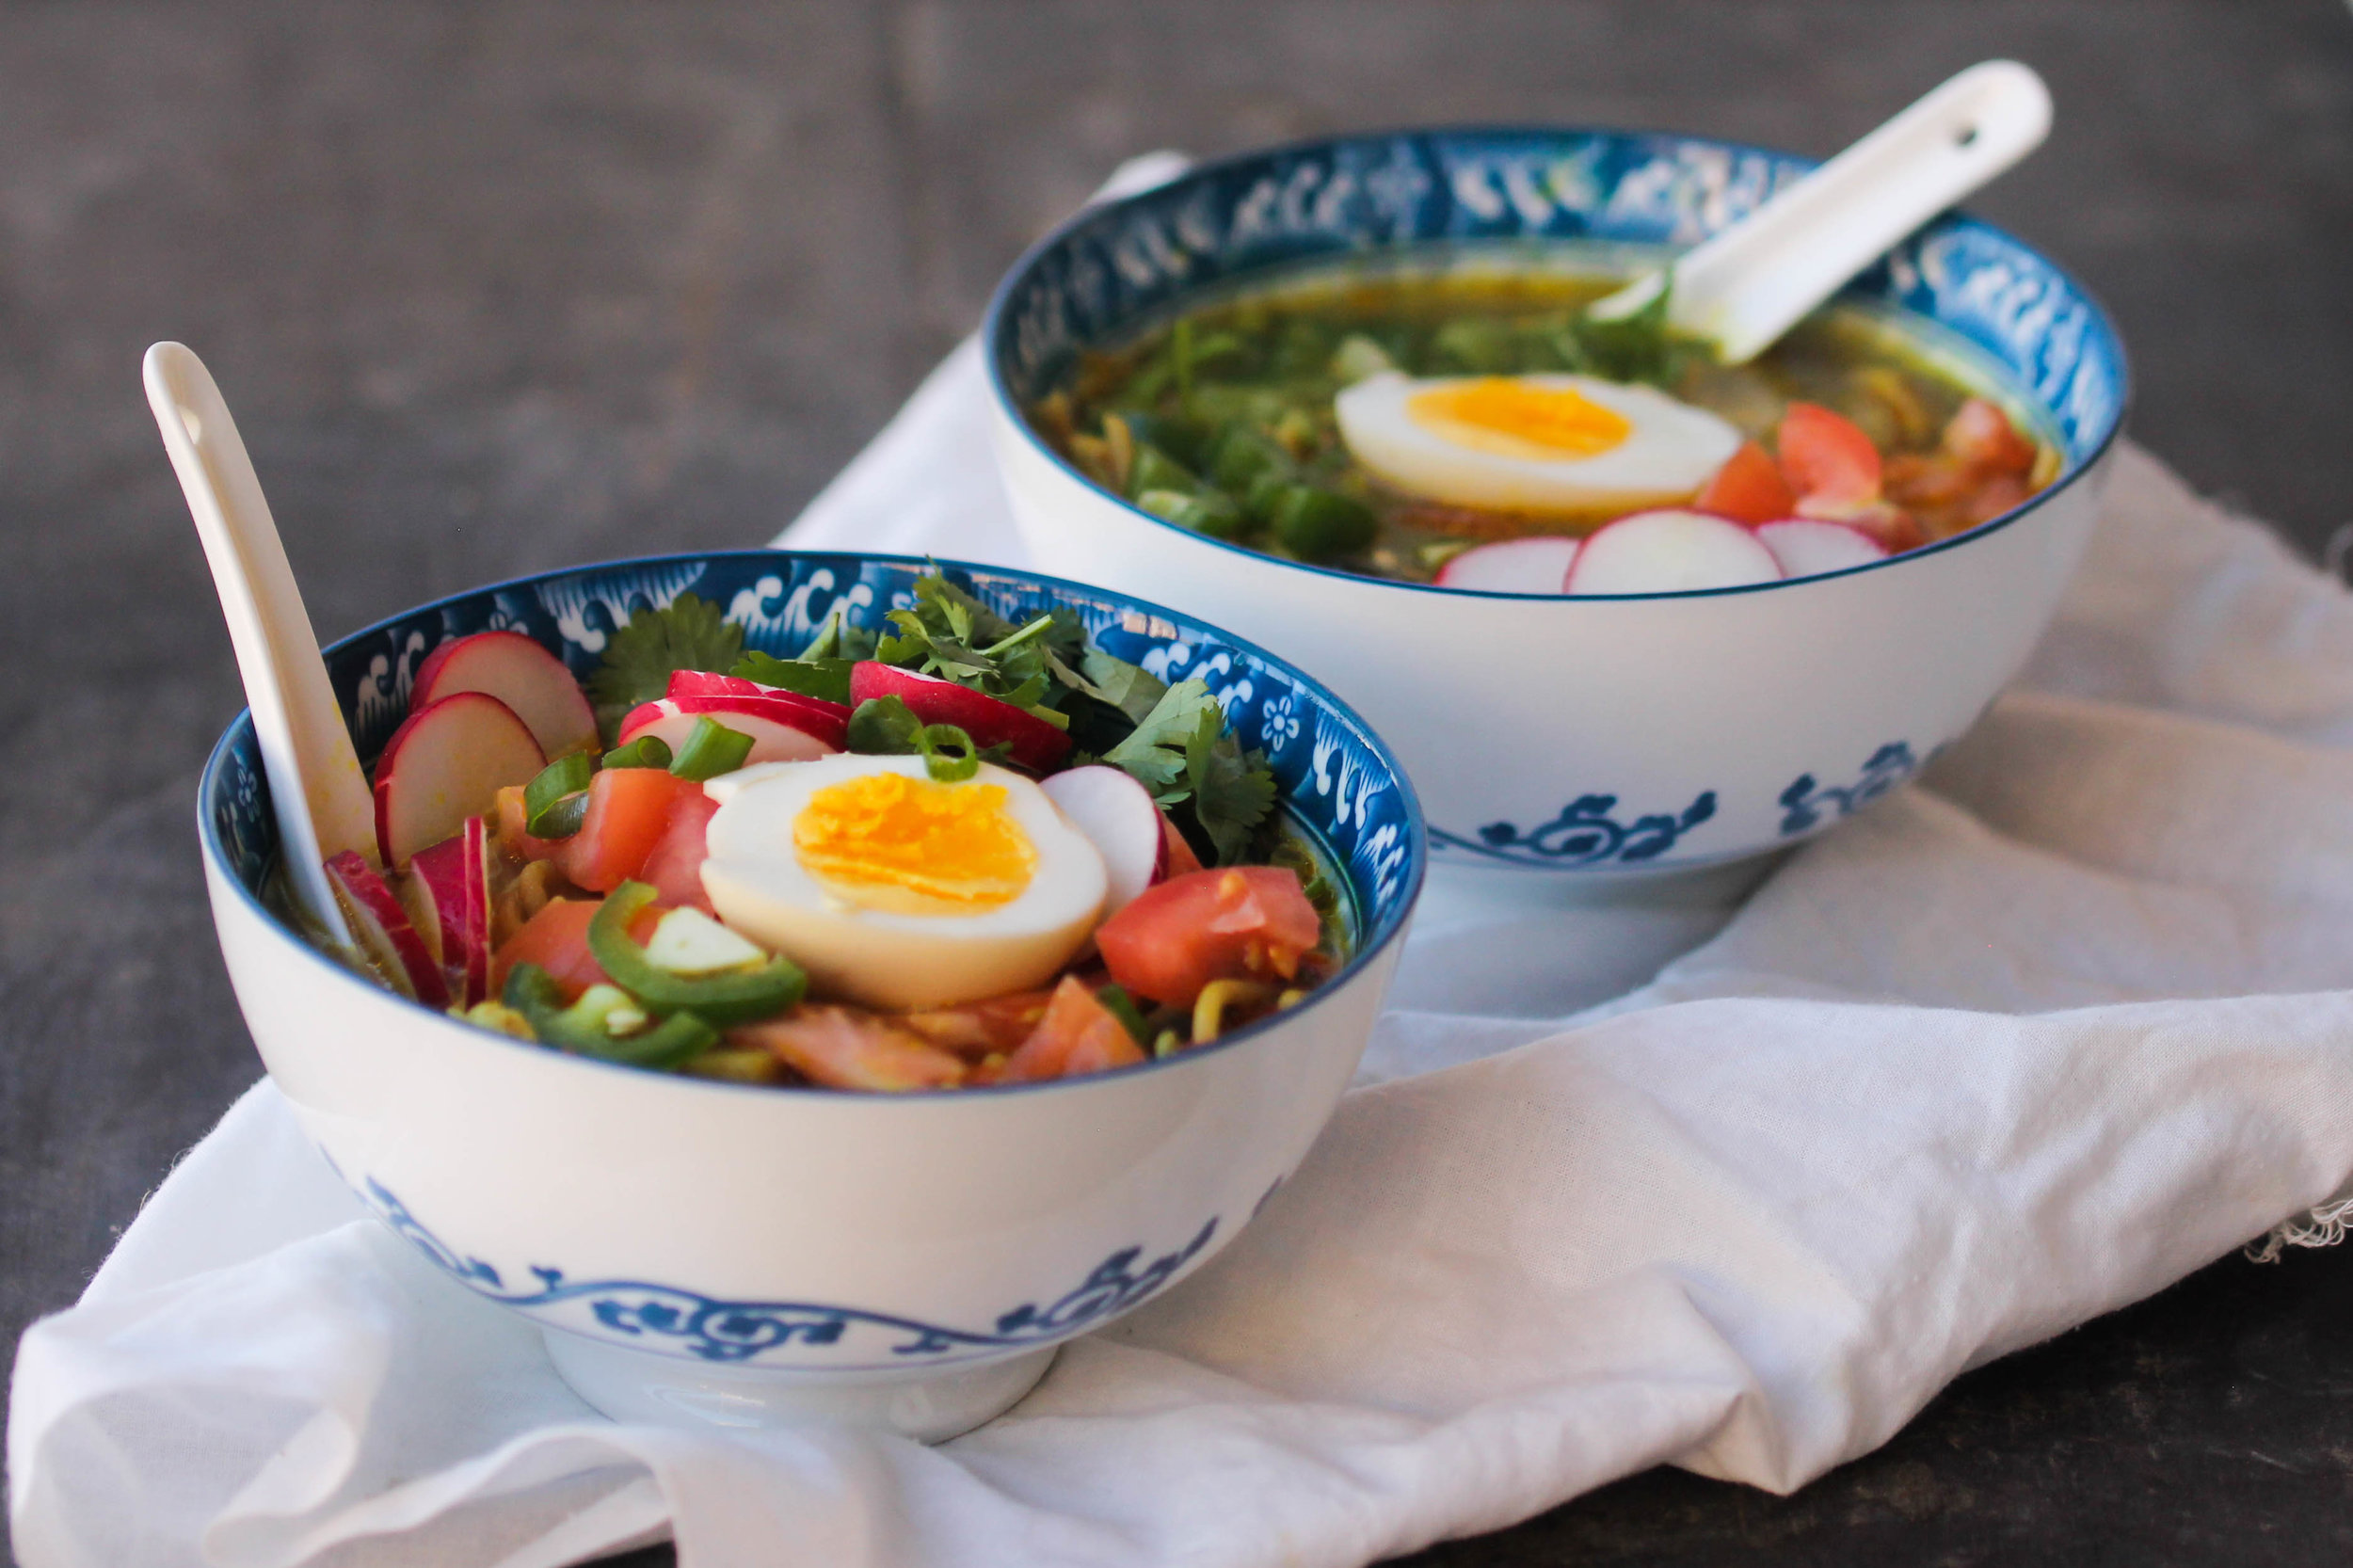 Nepali Style Thukpa is a cross between chicken noodle soup and ramen. It is a simple, wholesome, and comforting soup that is flexible to please every lifestyle.